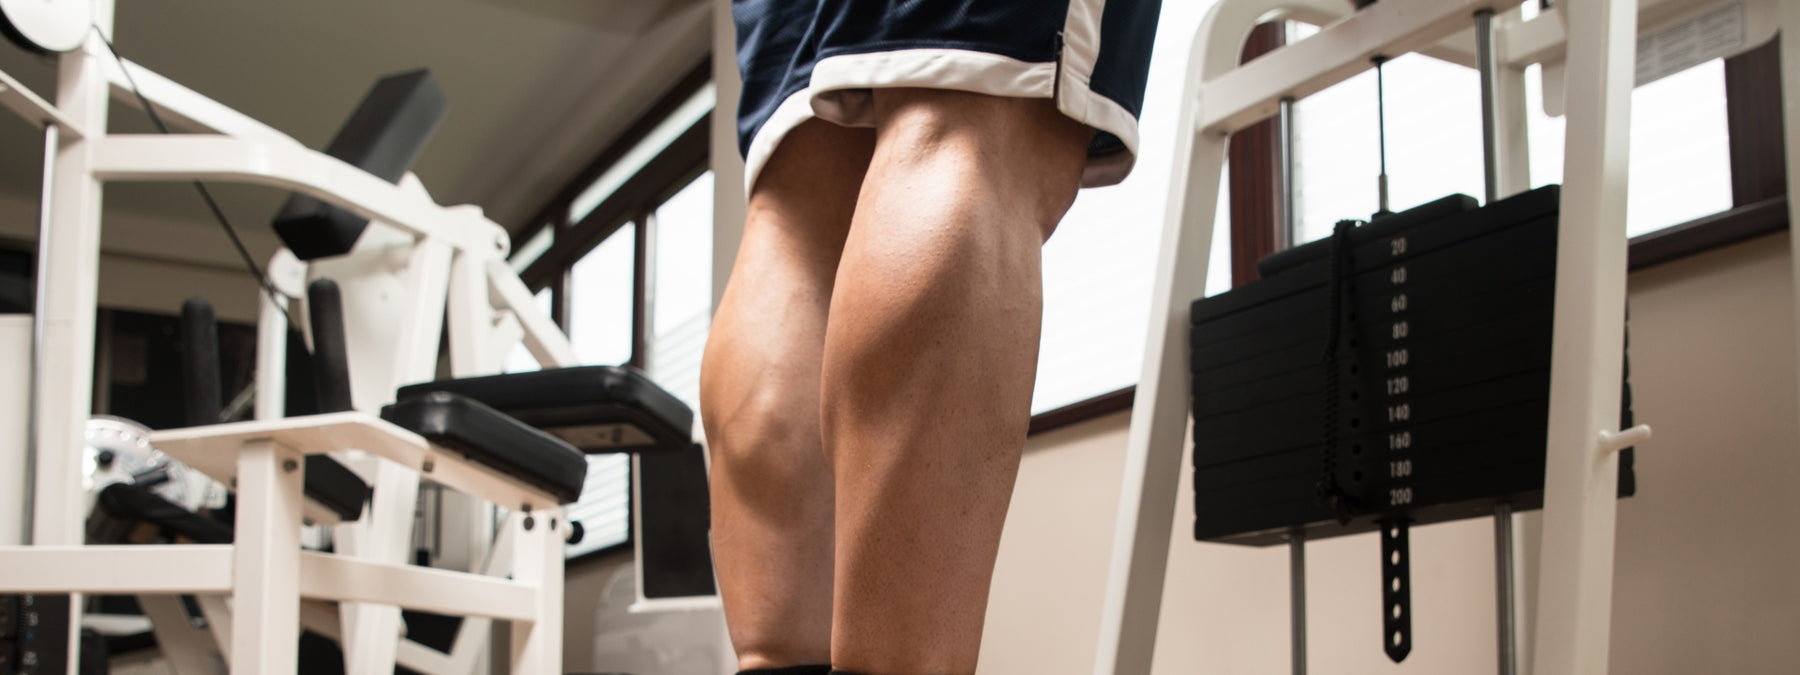 Bulls of Steel: The Last Calves Workout You Will Ever Need